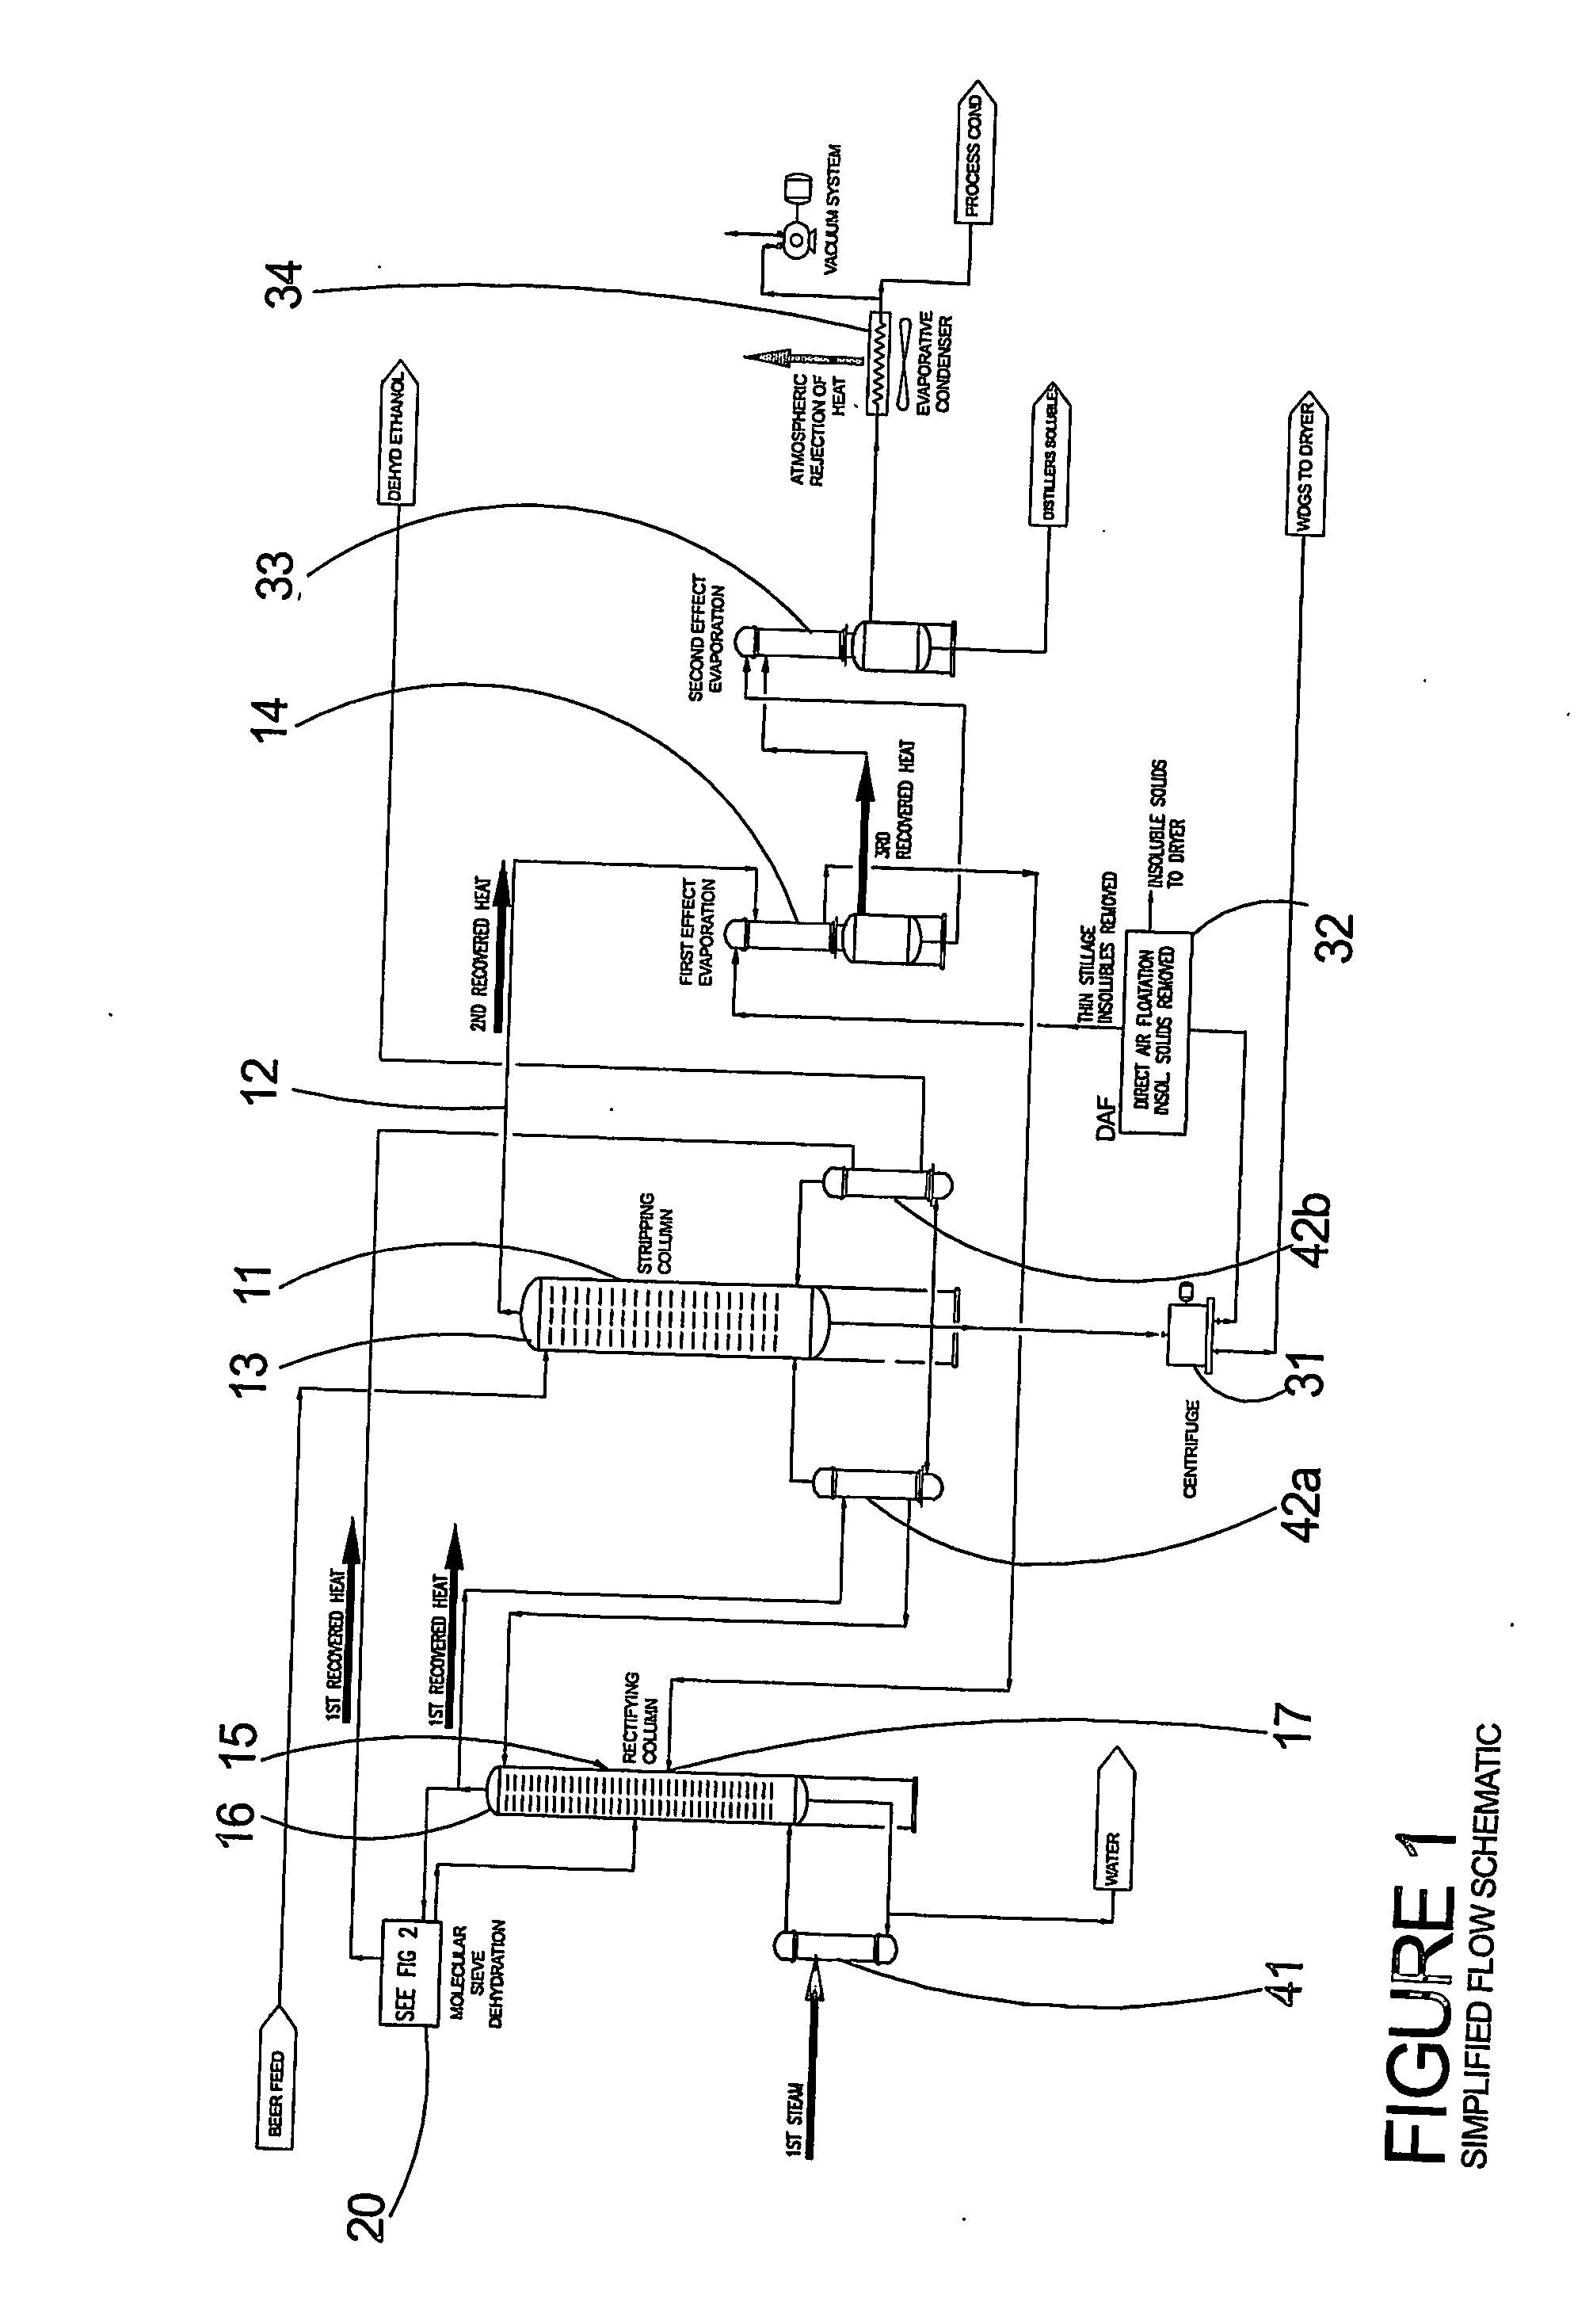 Ethanol distillation with distillers soluble solids recovery apparatus